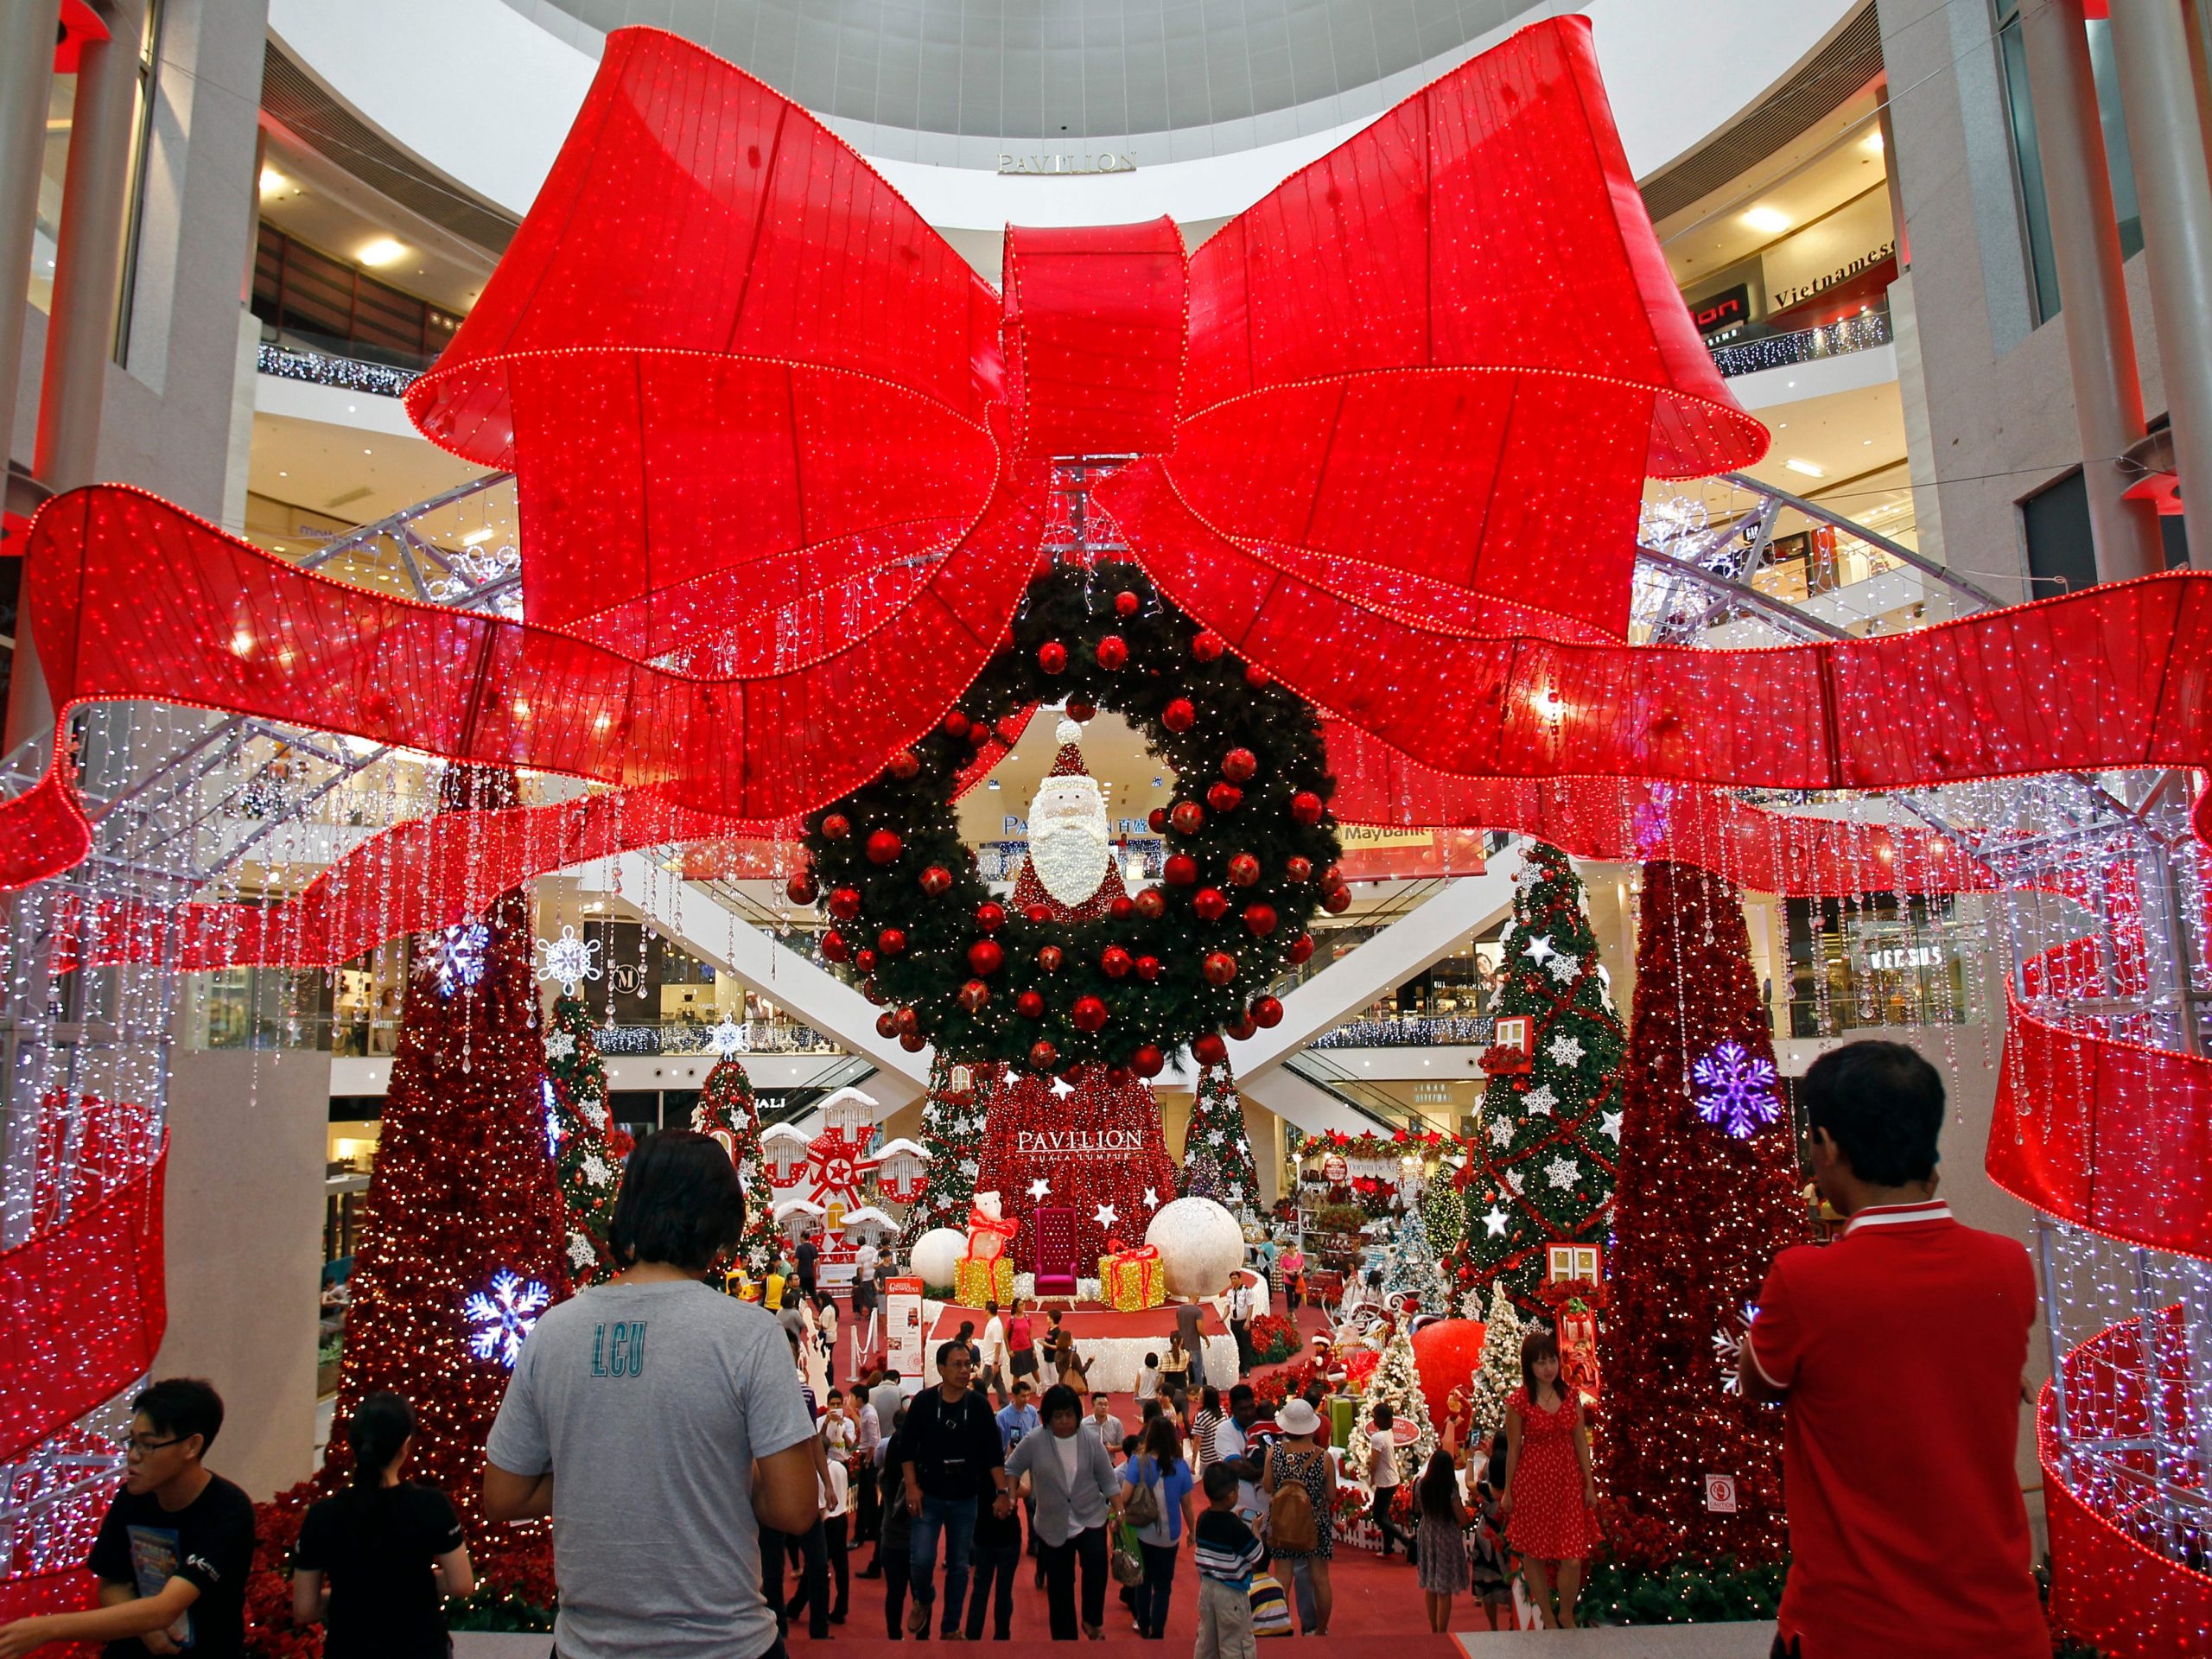 crowds walk by a holiday shopping display with a big red bow and a Christmas wreath